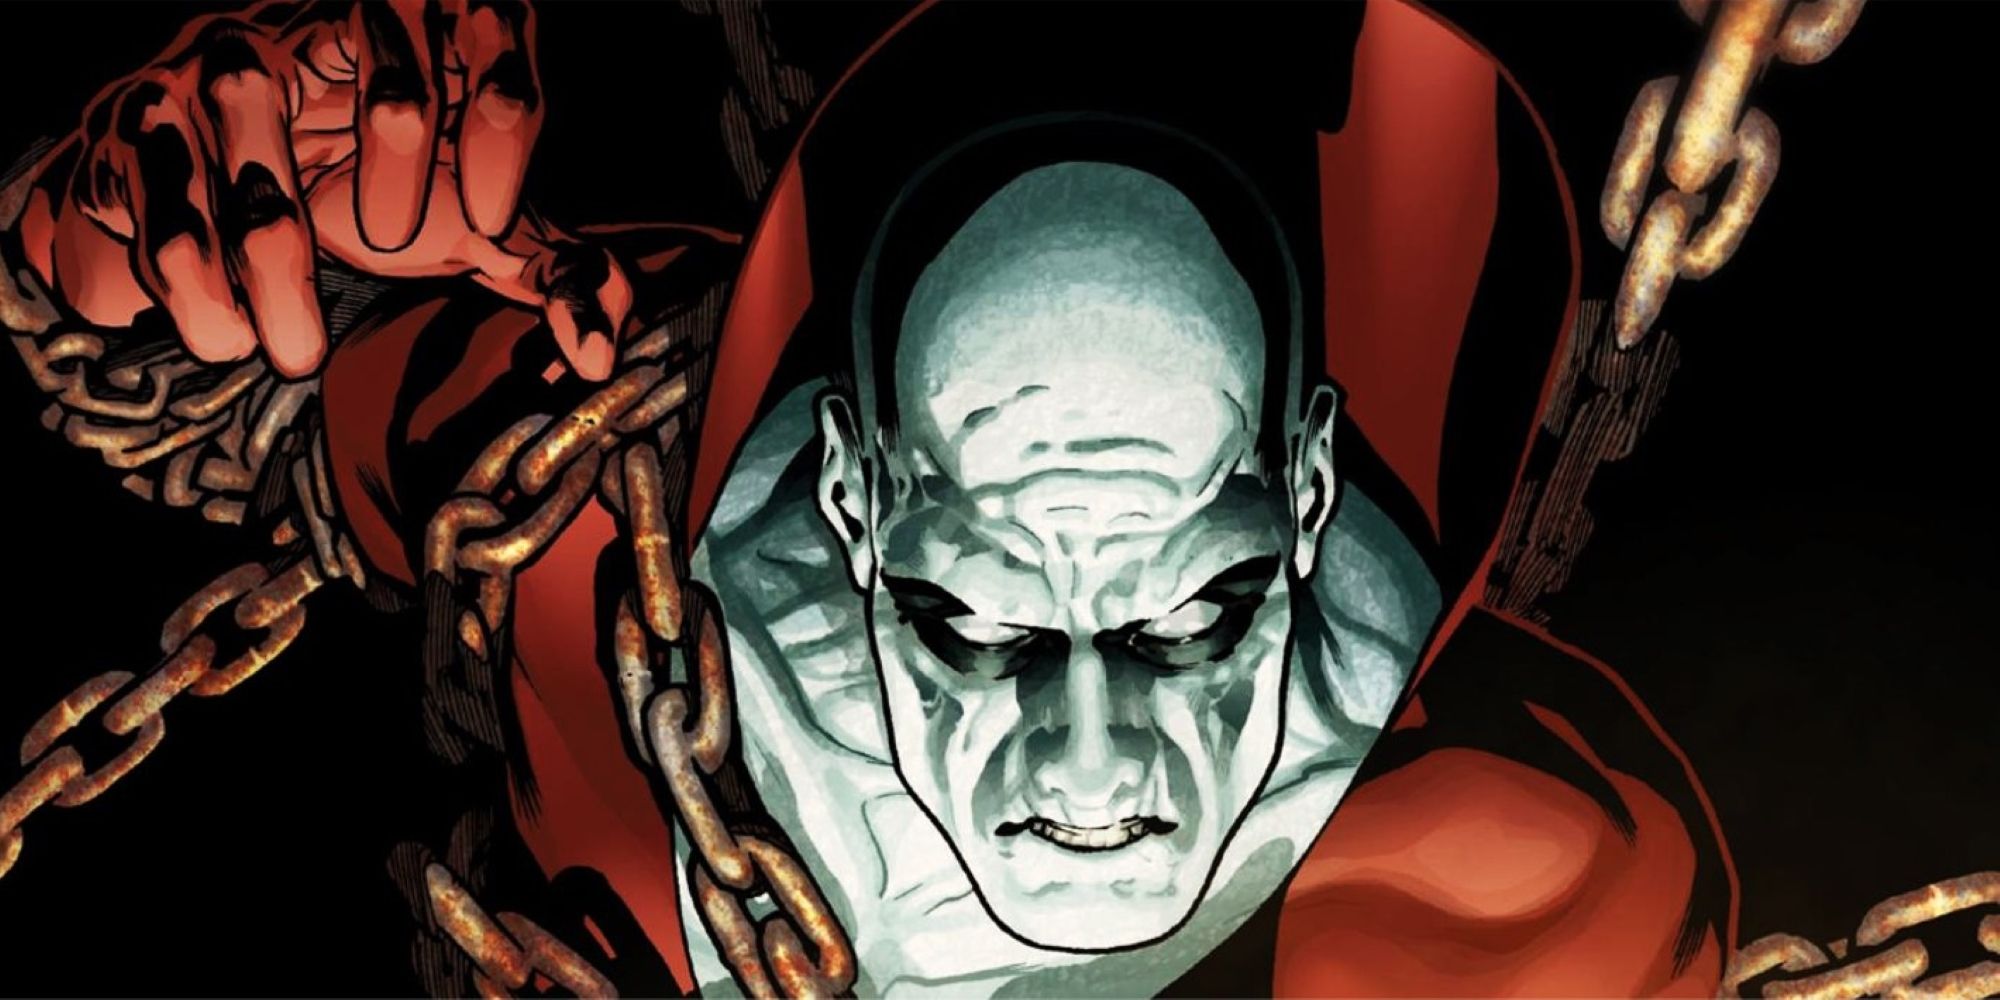 Deadman flies while wearing chains in DC Comics.